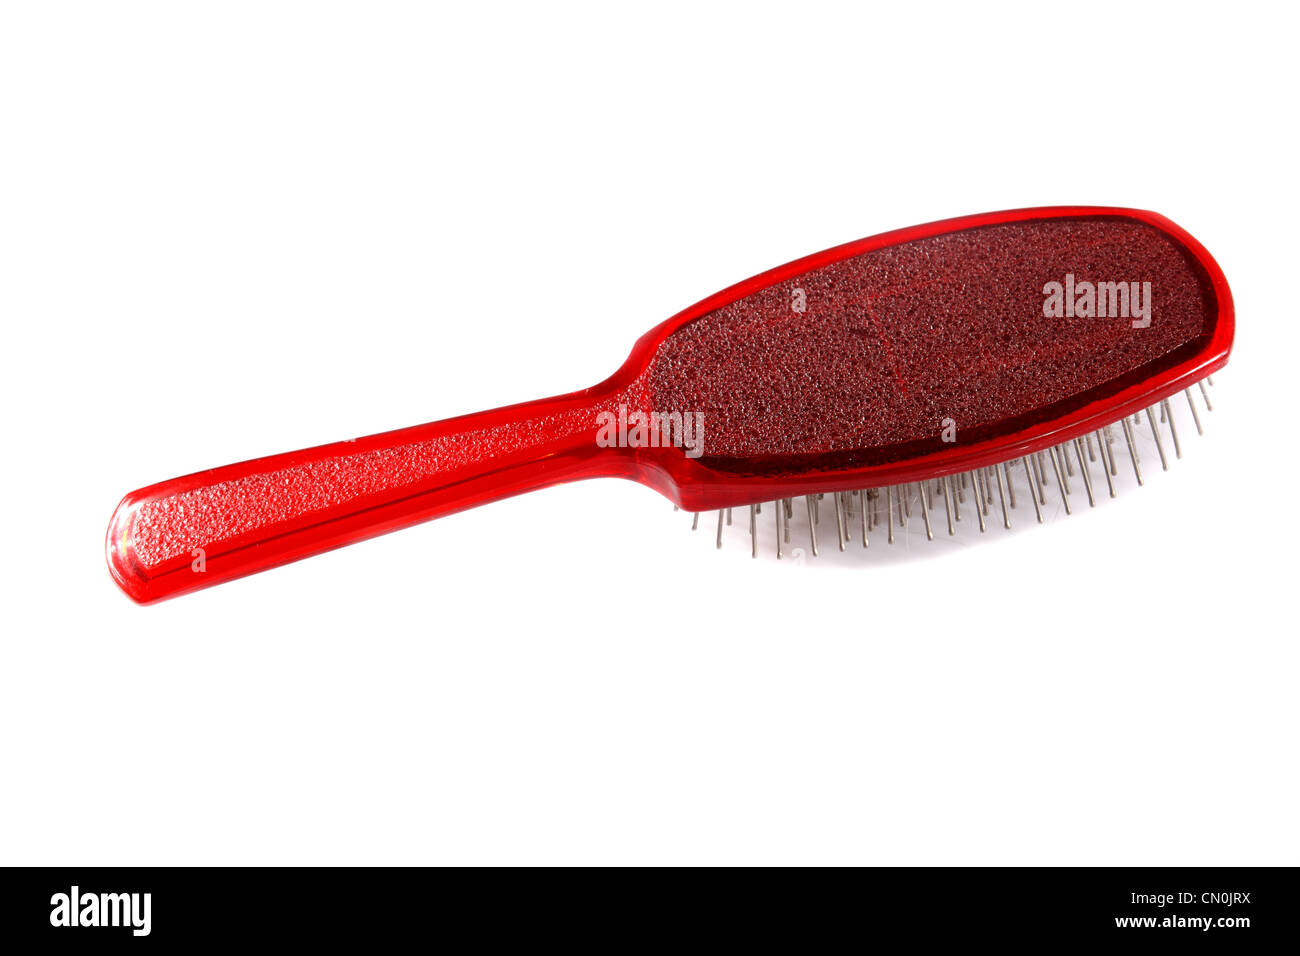 red hair brush on a white background Stock Photo